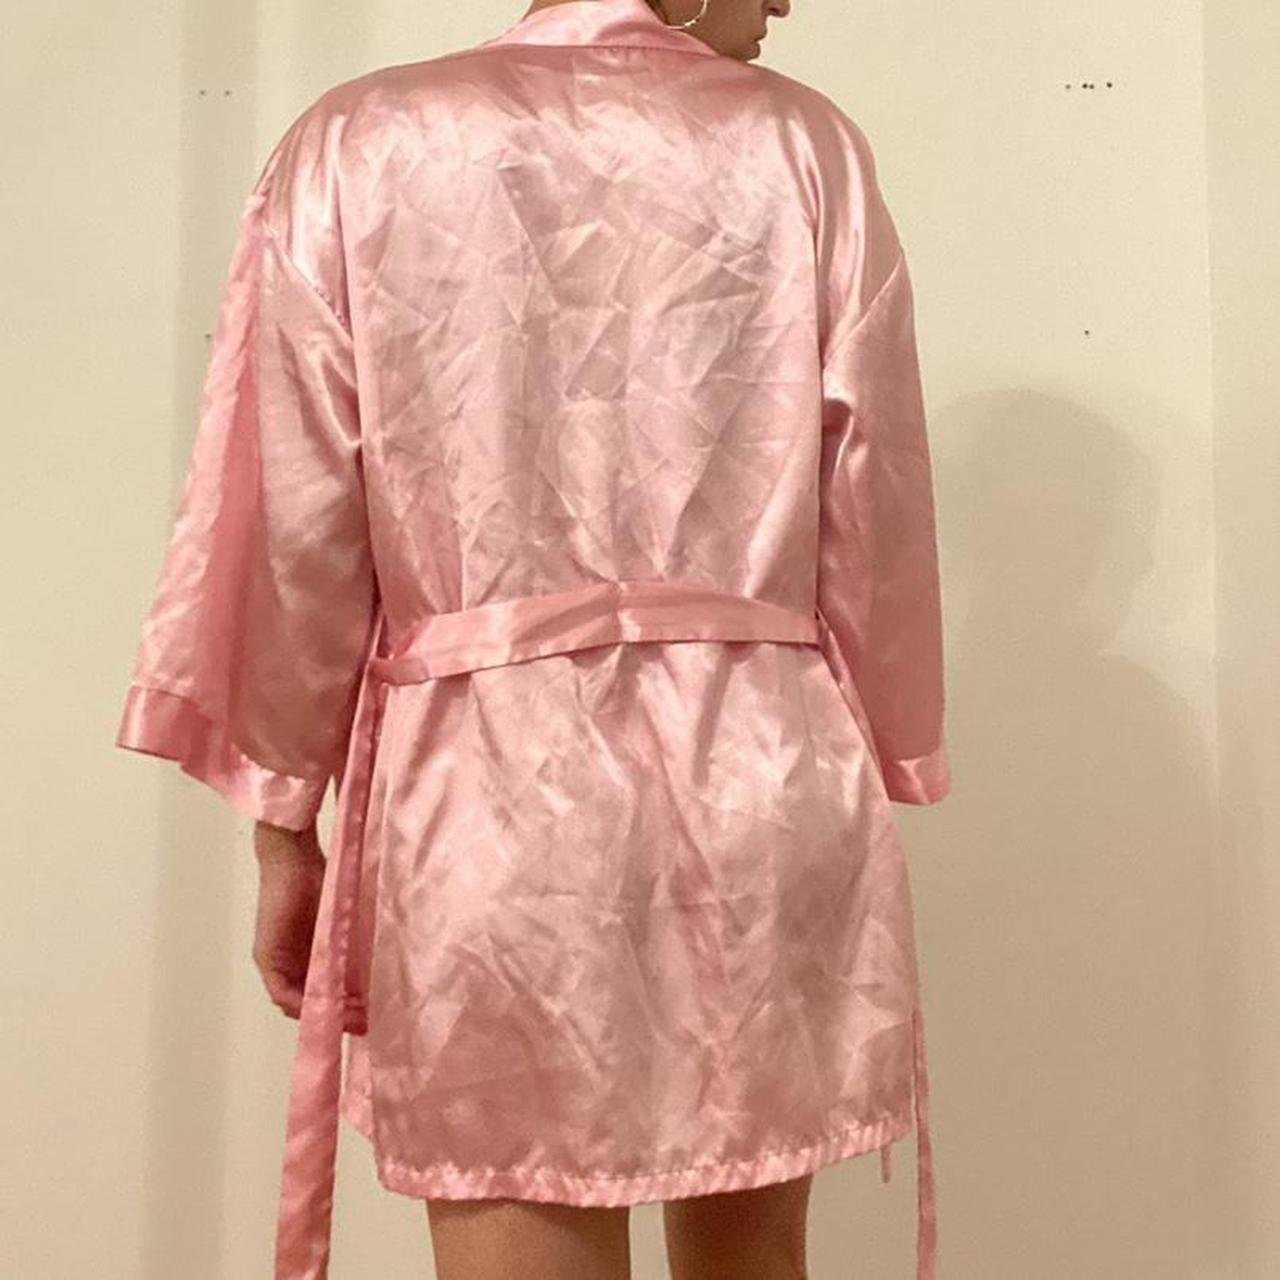 Pink satin robe with waist tie 🎀 this material is... - Depop